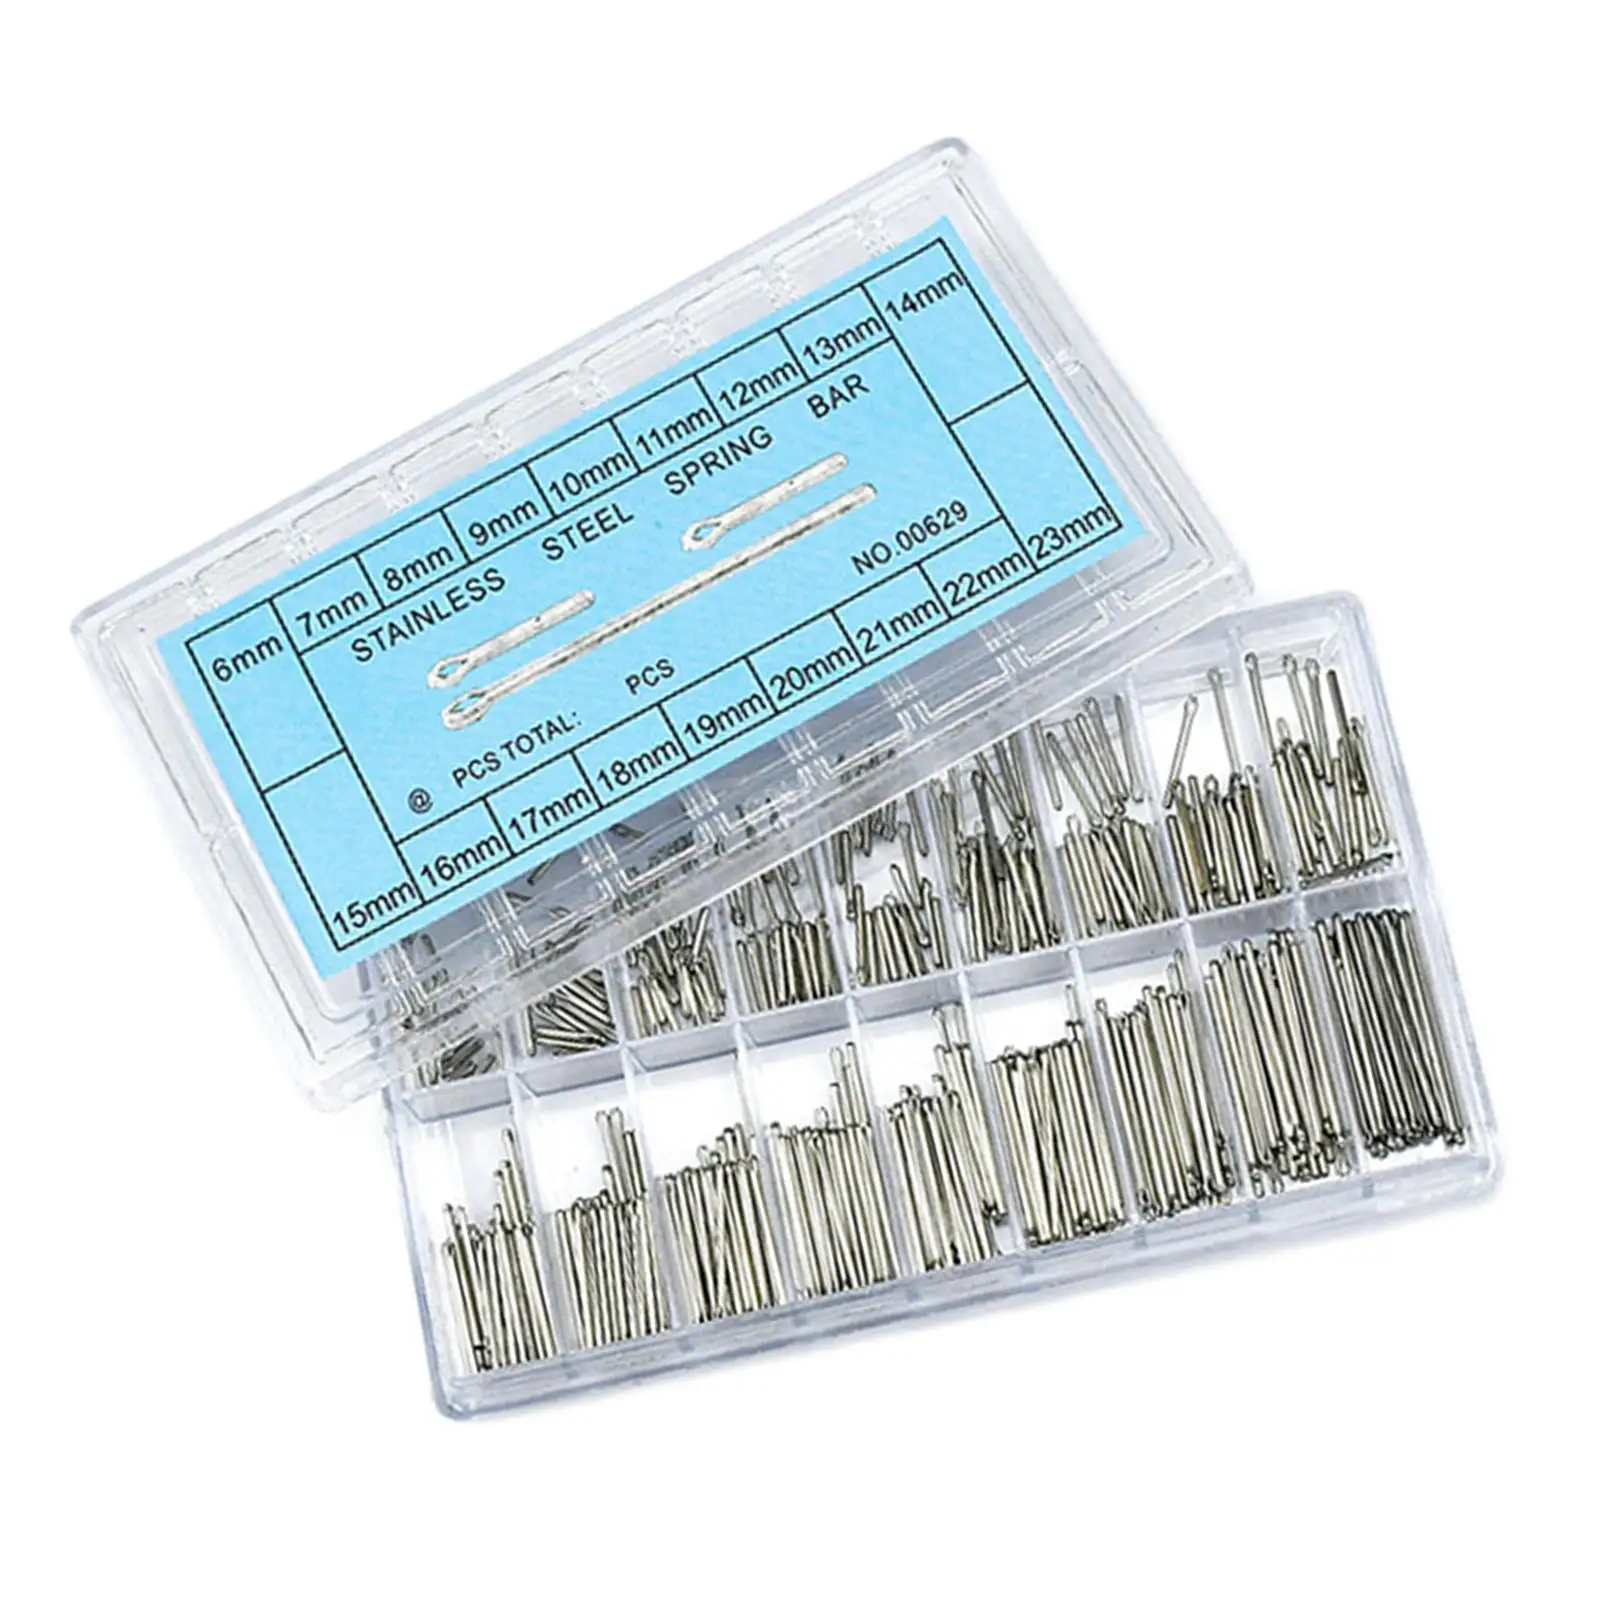 360Pcs Metal Watch Band Link Pins 6-23mm Beads Split Pin Watchmaker Hairpin Strap Link Pins Repair in A Box 18 Sizes Replacement